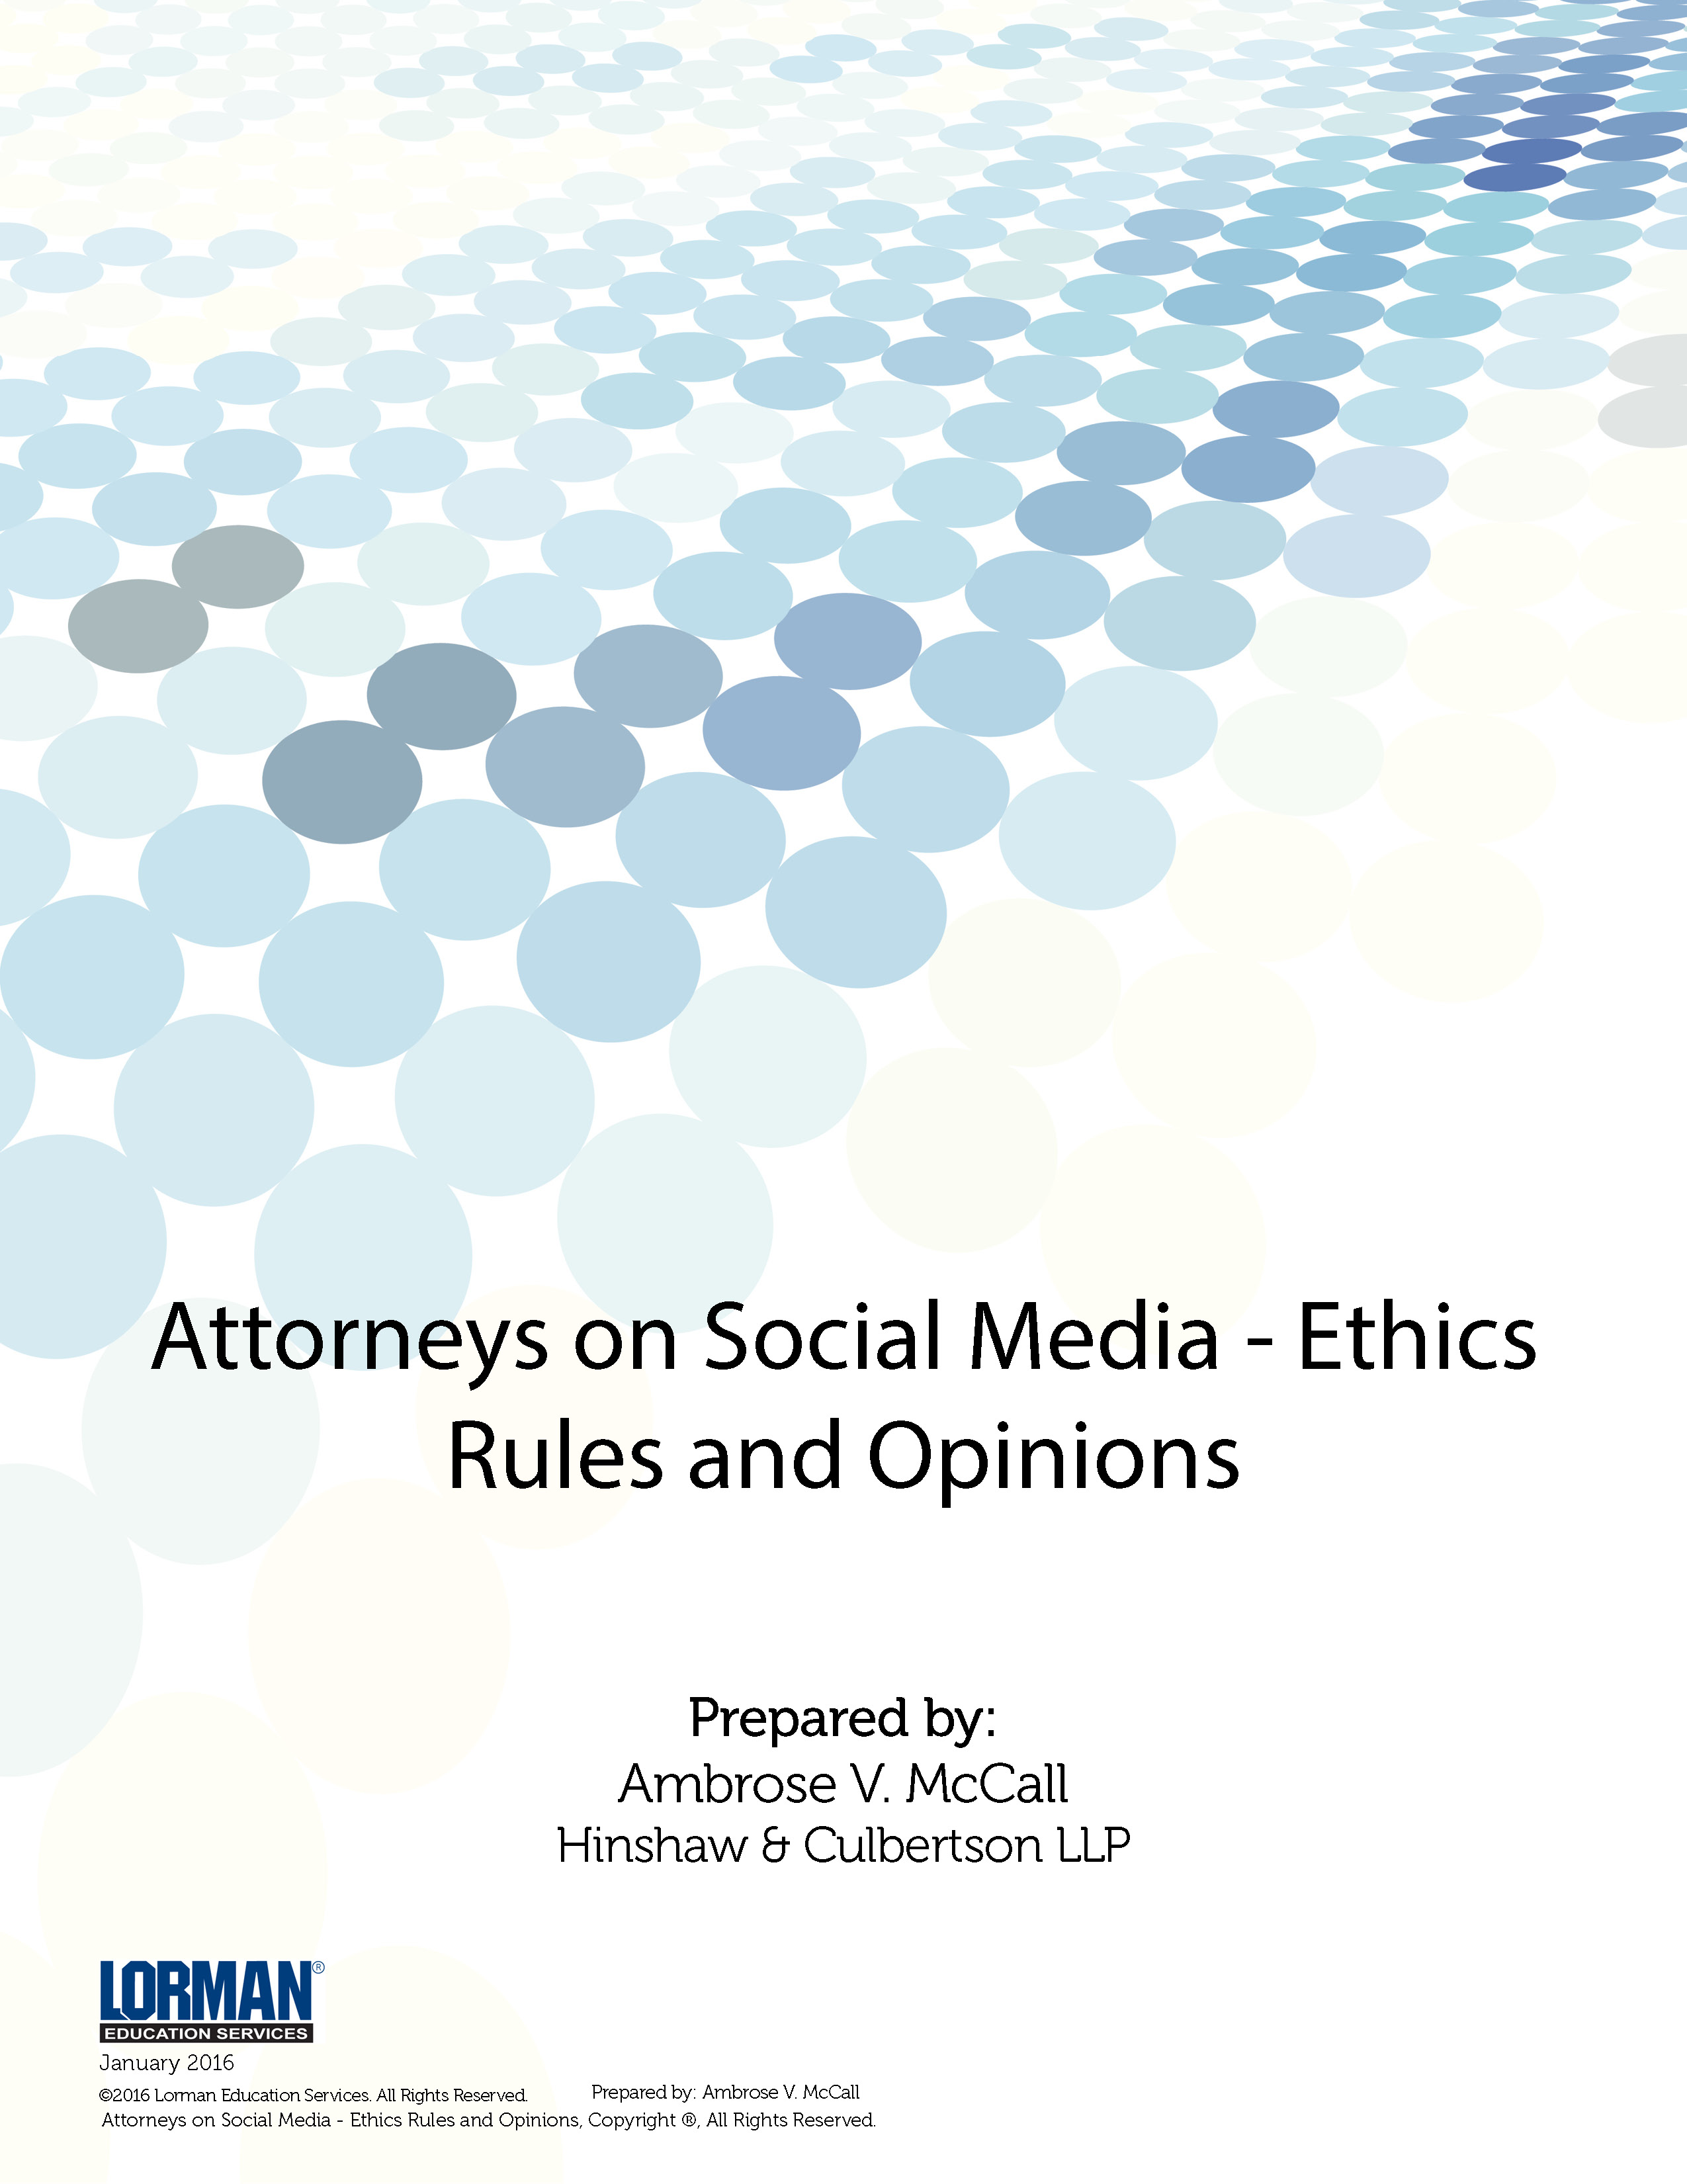 Attorneys on Social Media - Ethics Rules and Opinions